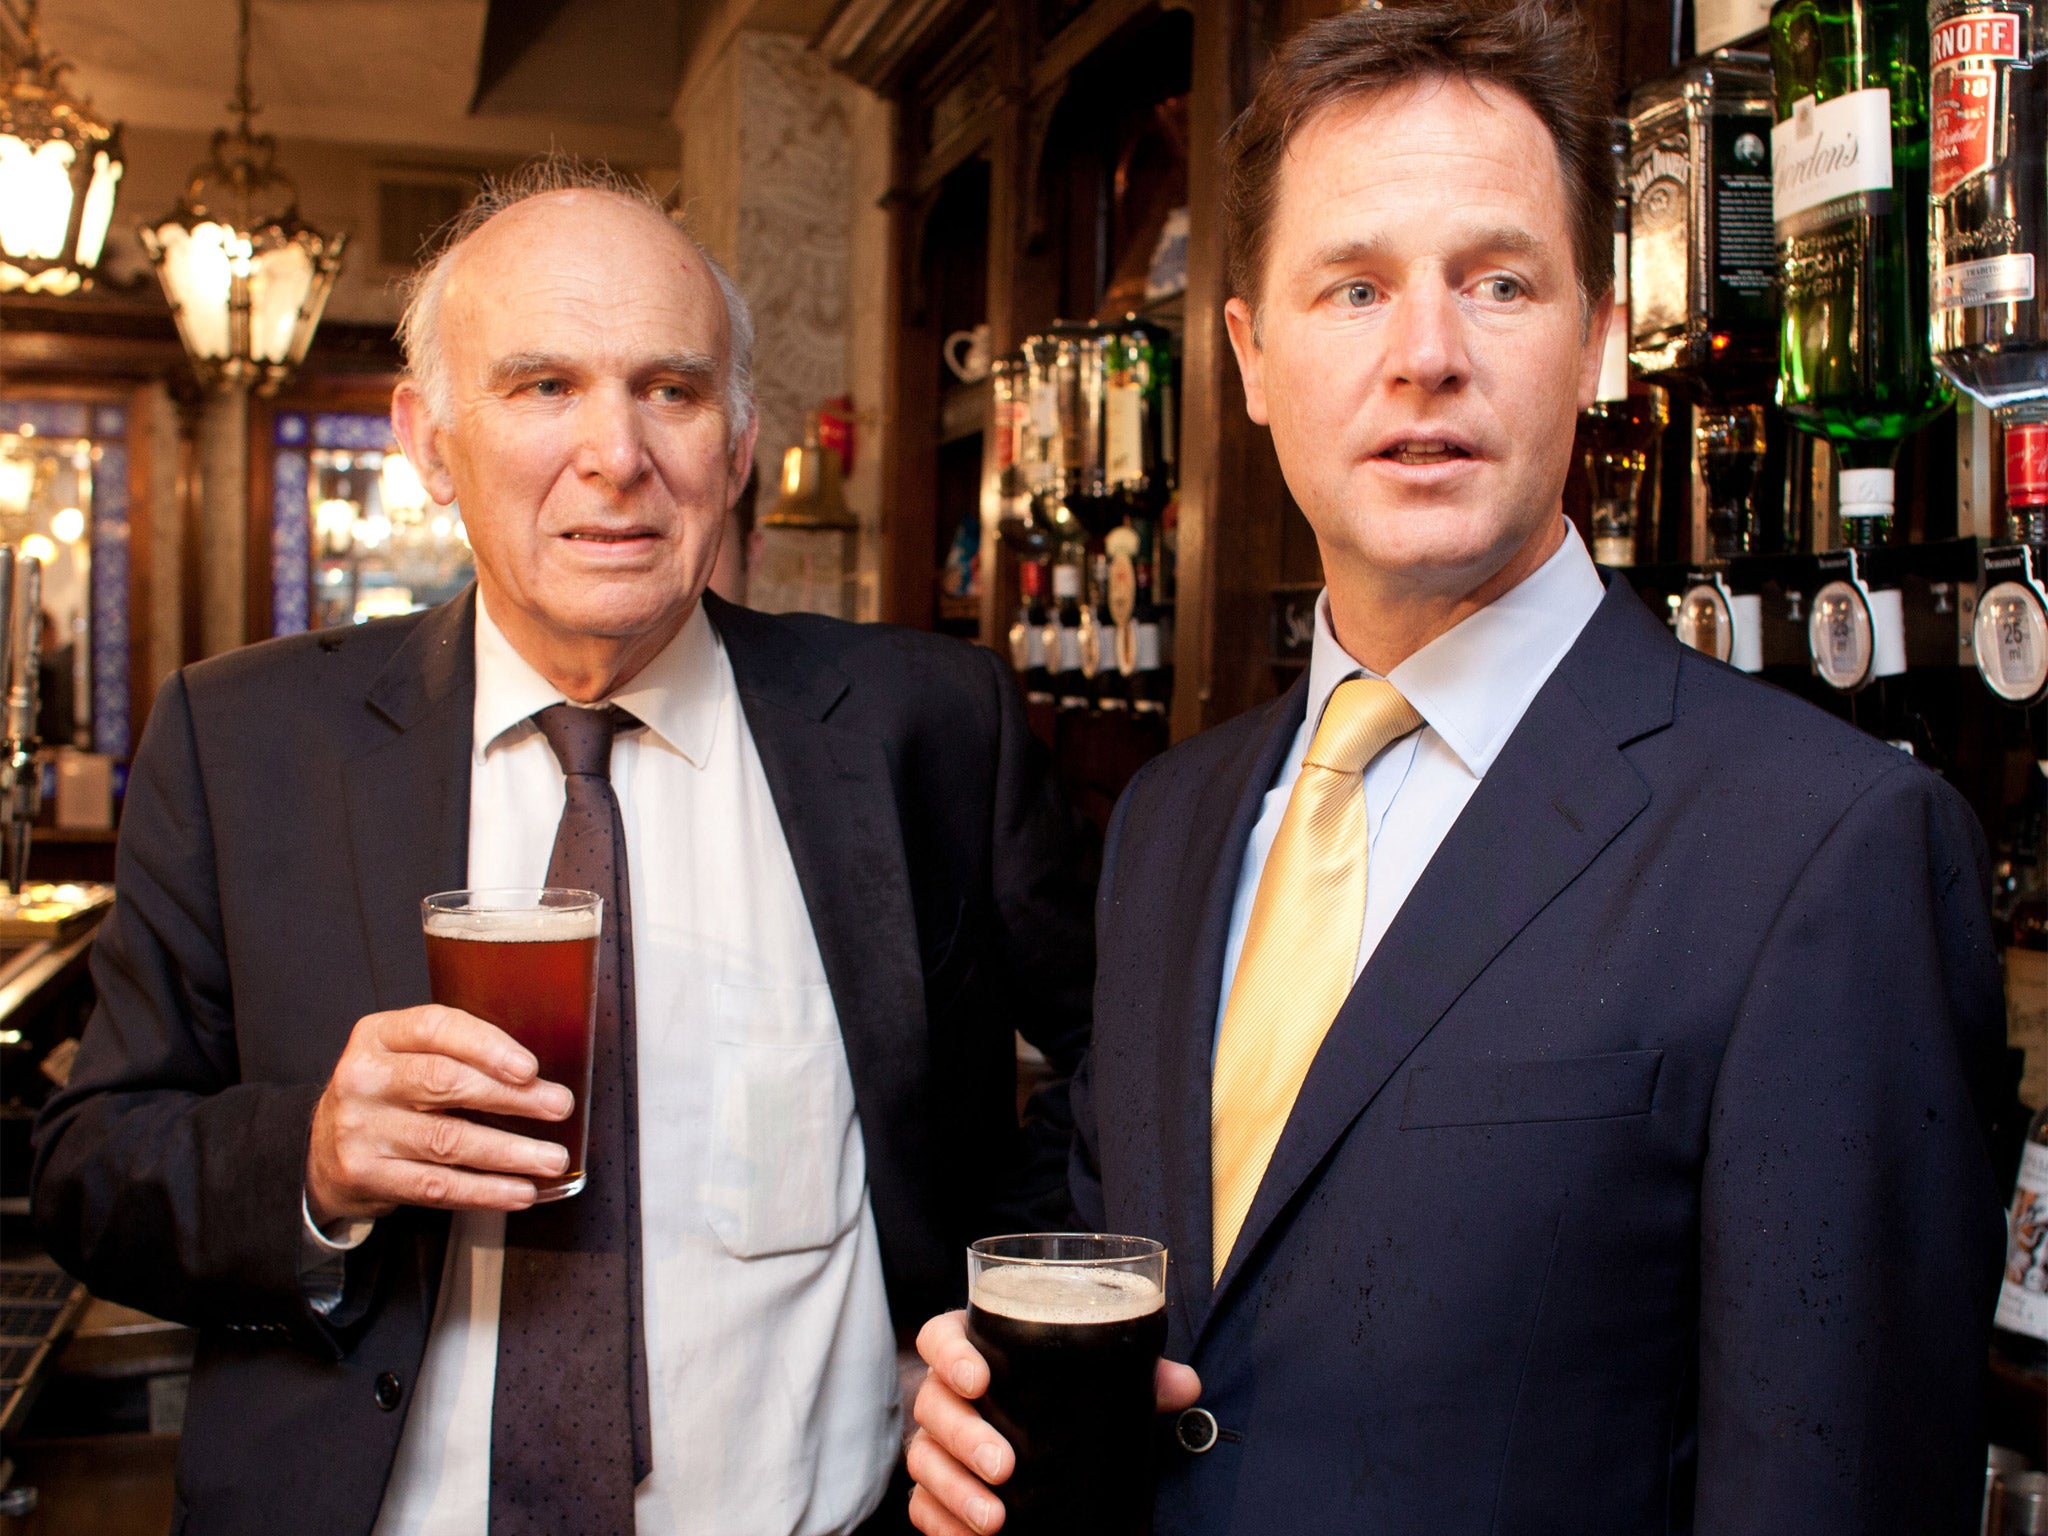 Vince Cable and Nick Clegg enjoy a drink at the Queens Head Pub